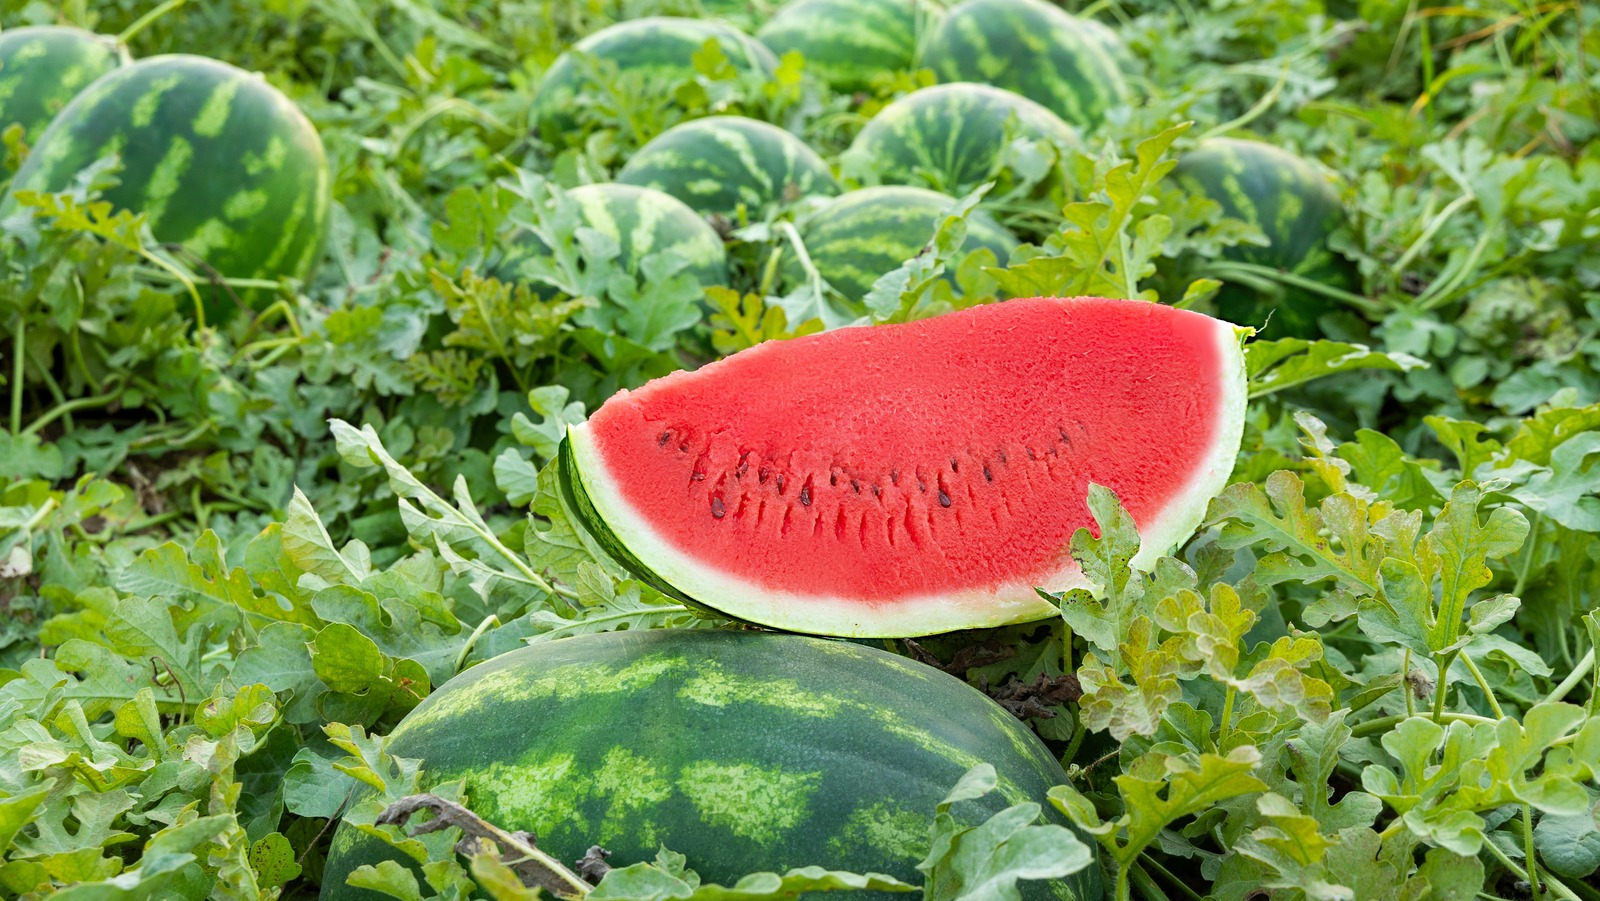 This country produces most of the world's watermelons